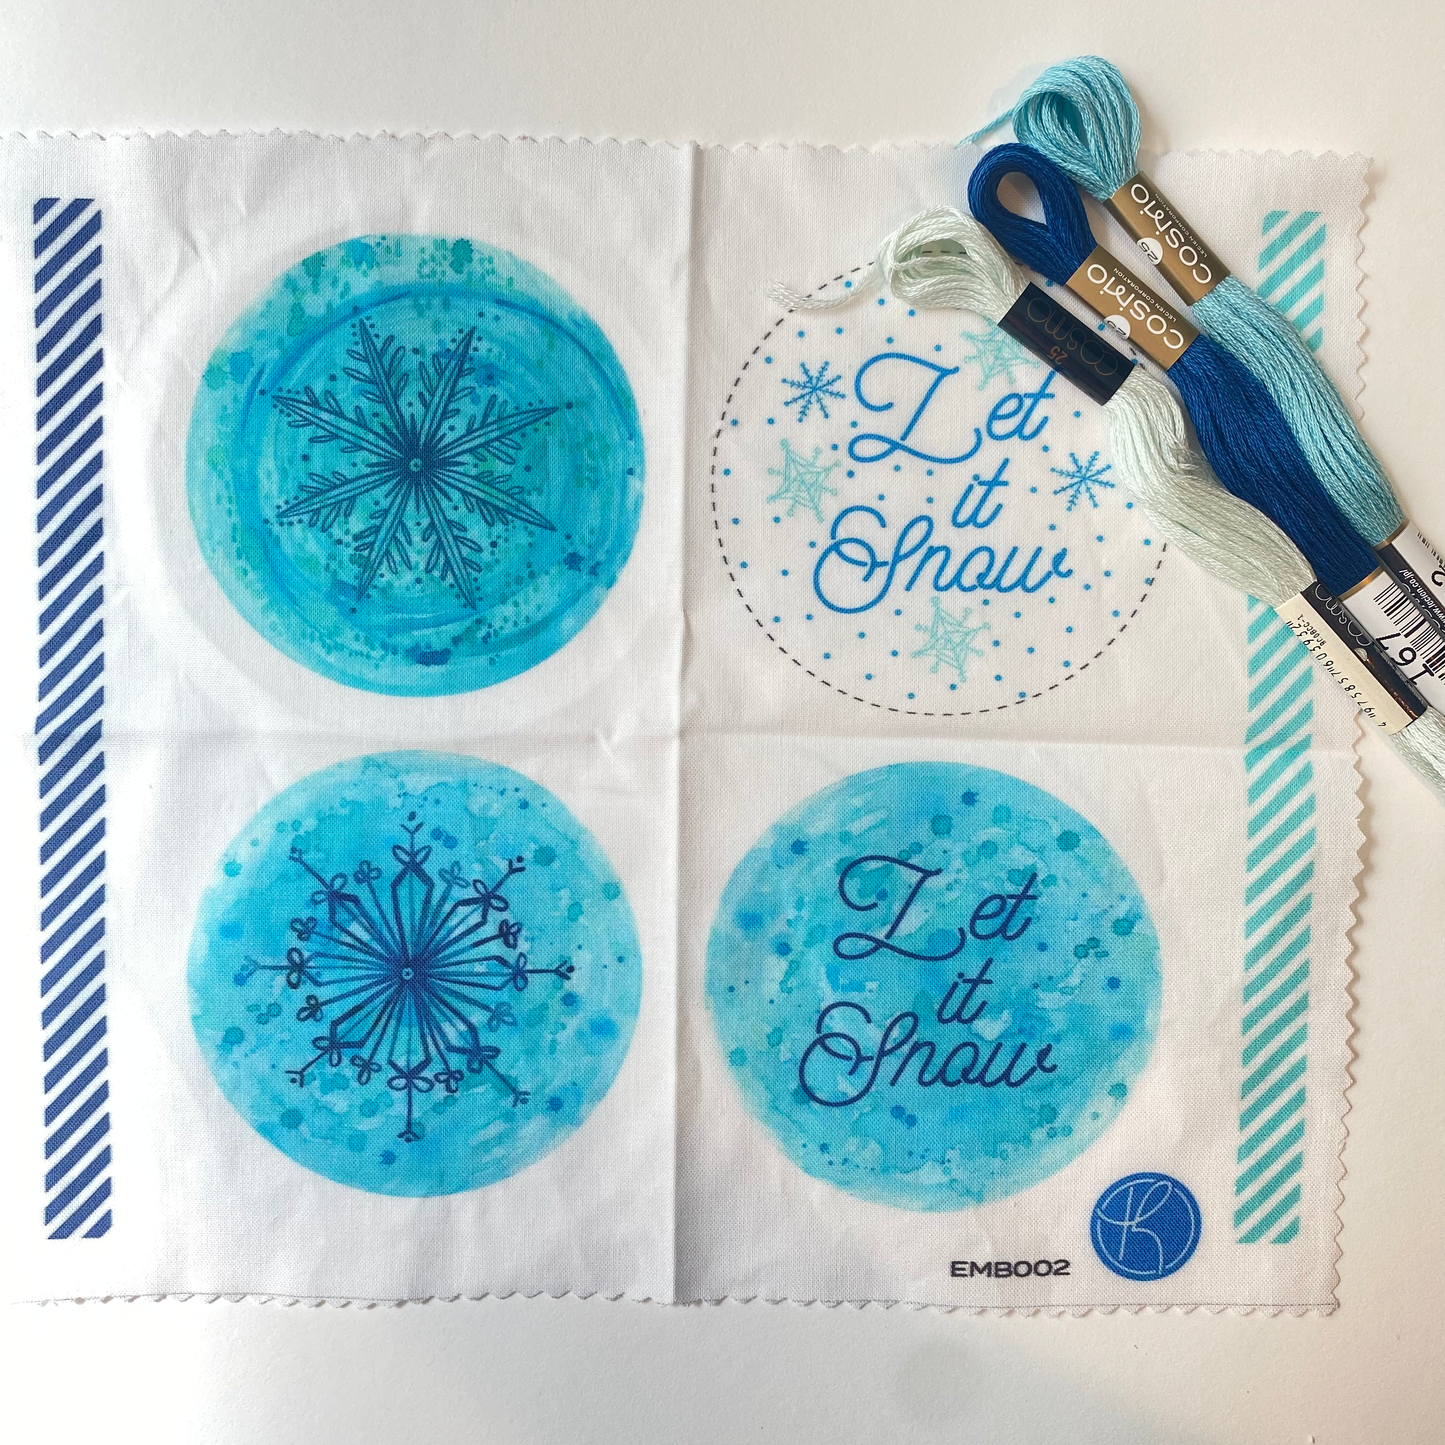 Snowflake Ornament Embroidery Kit-Blue/Blue (Small)